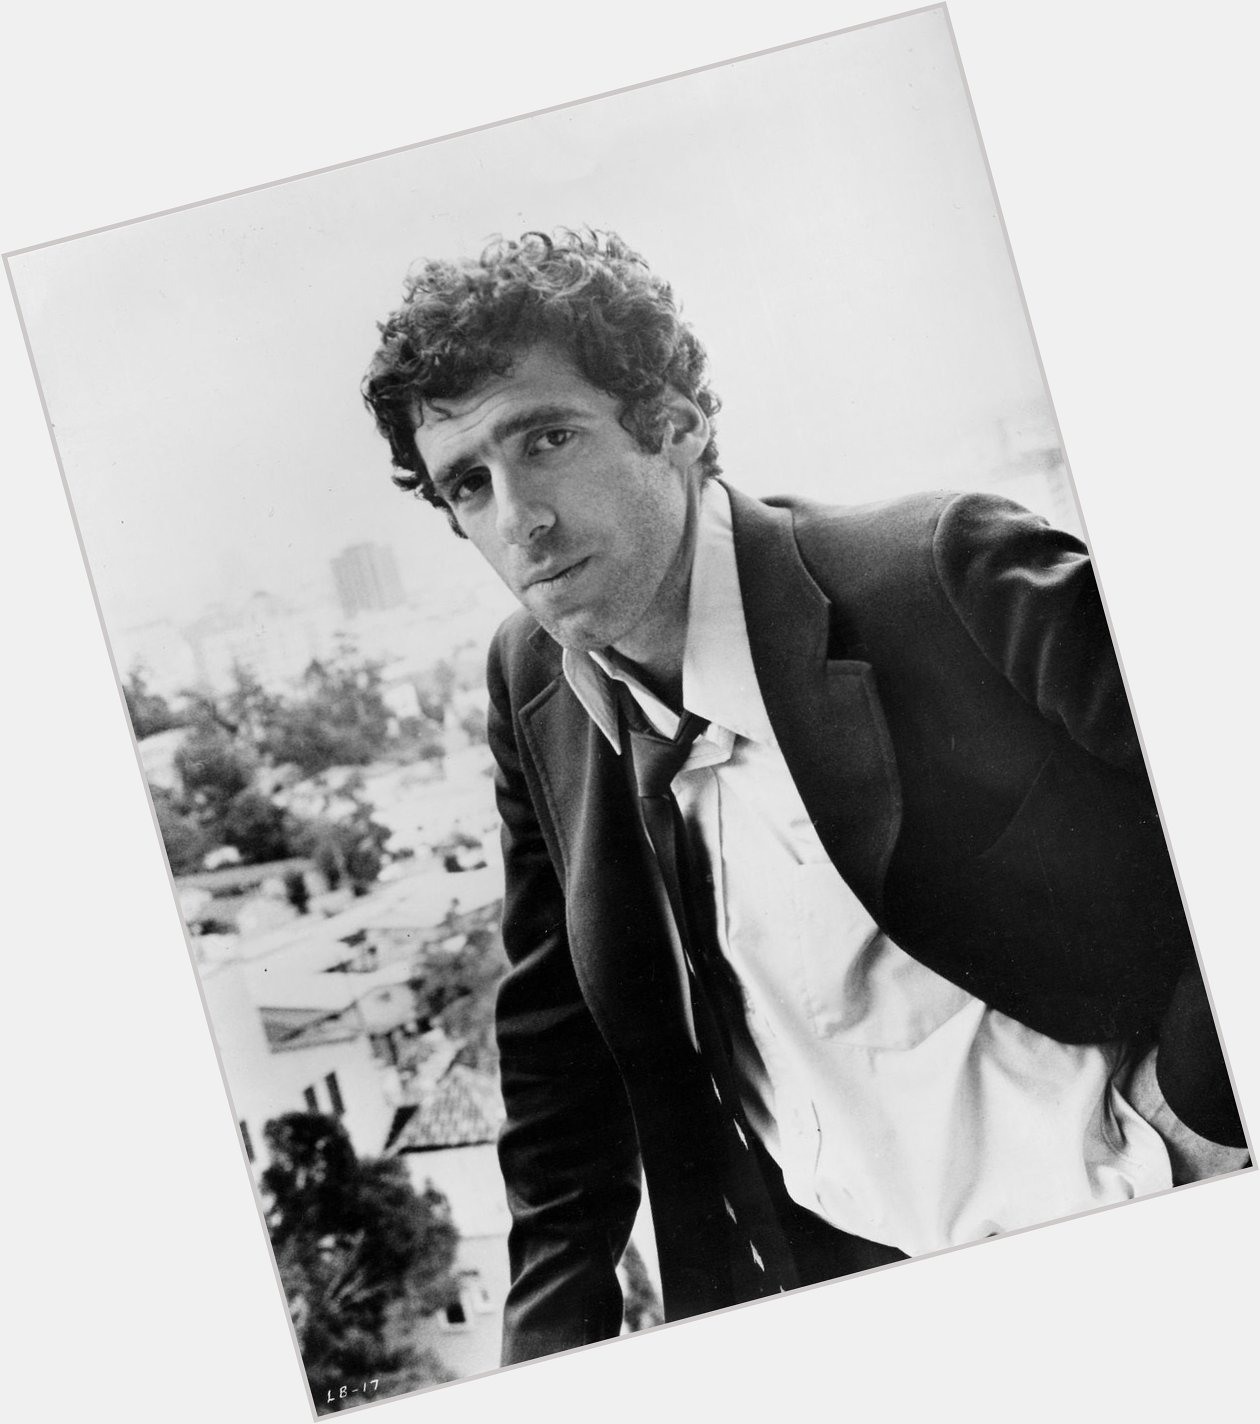 Happy birthday to the greatest actor ever, Elliott Gould! 